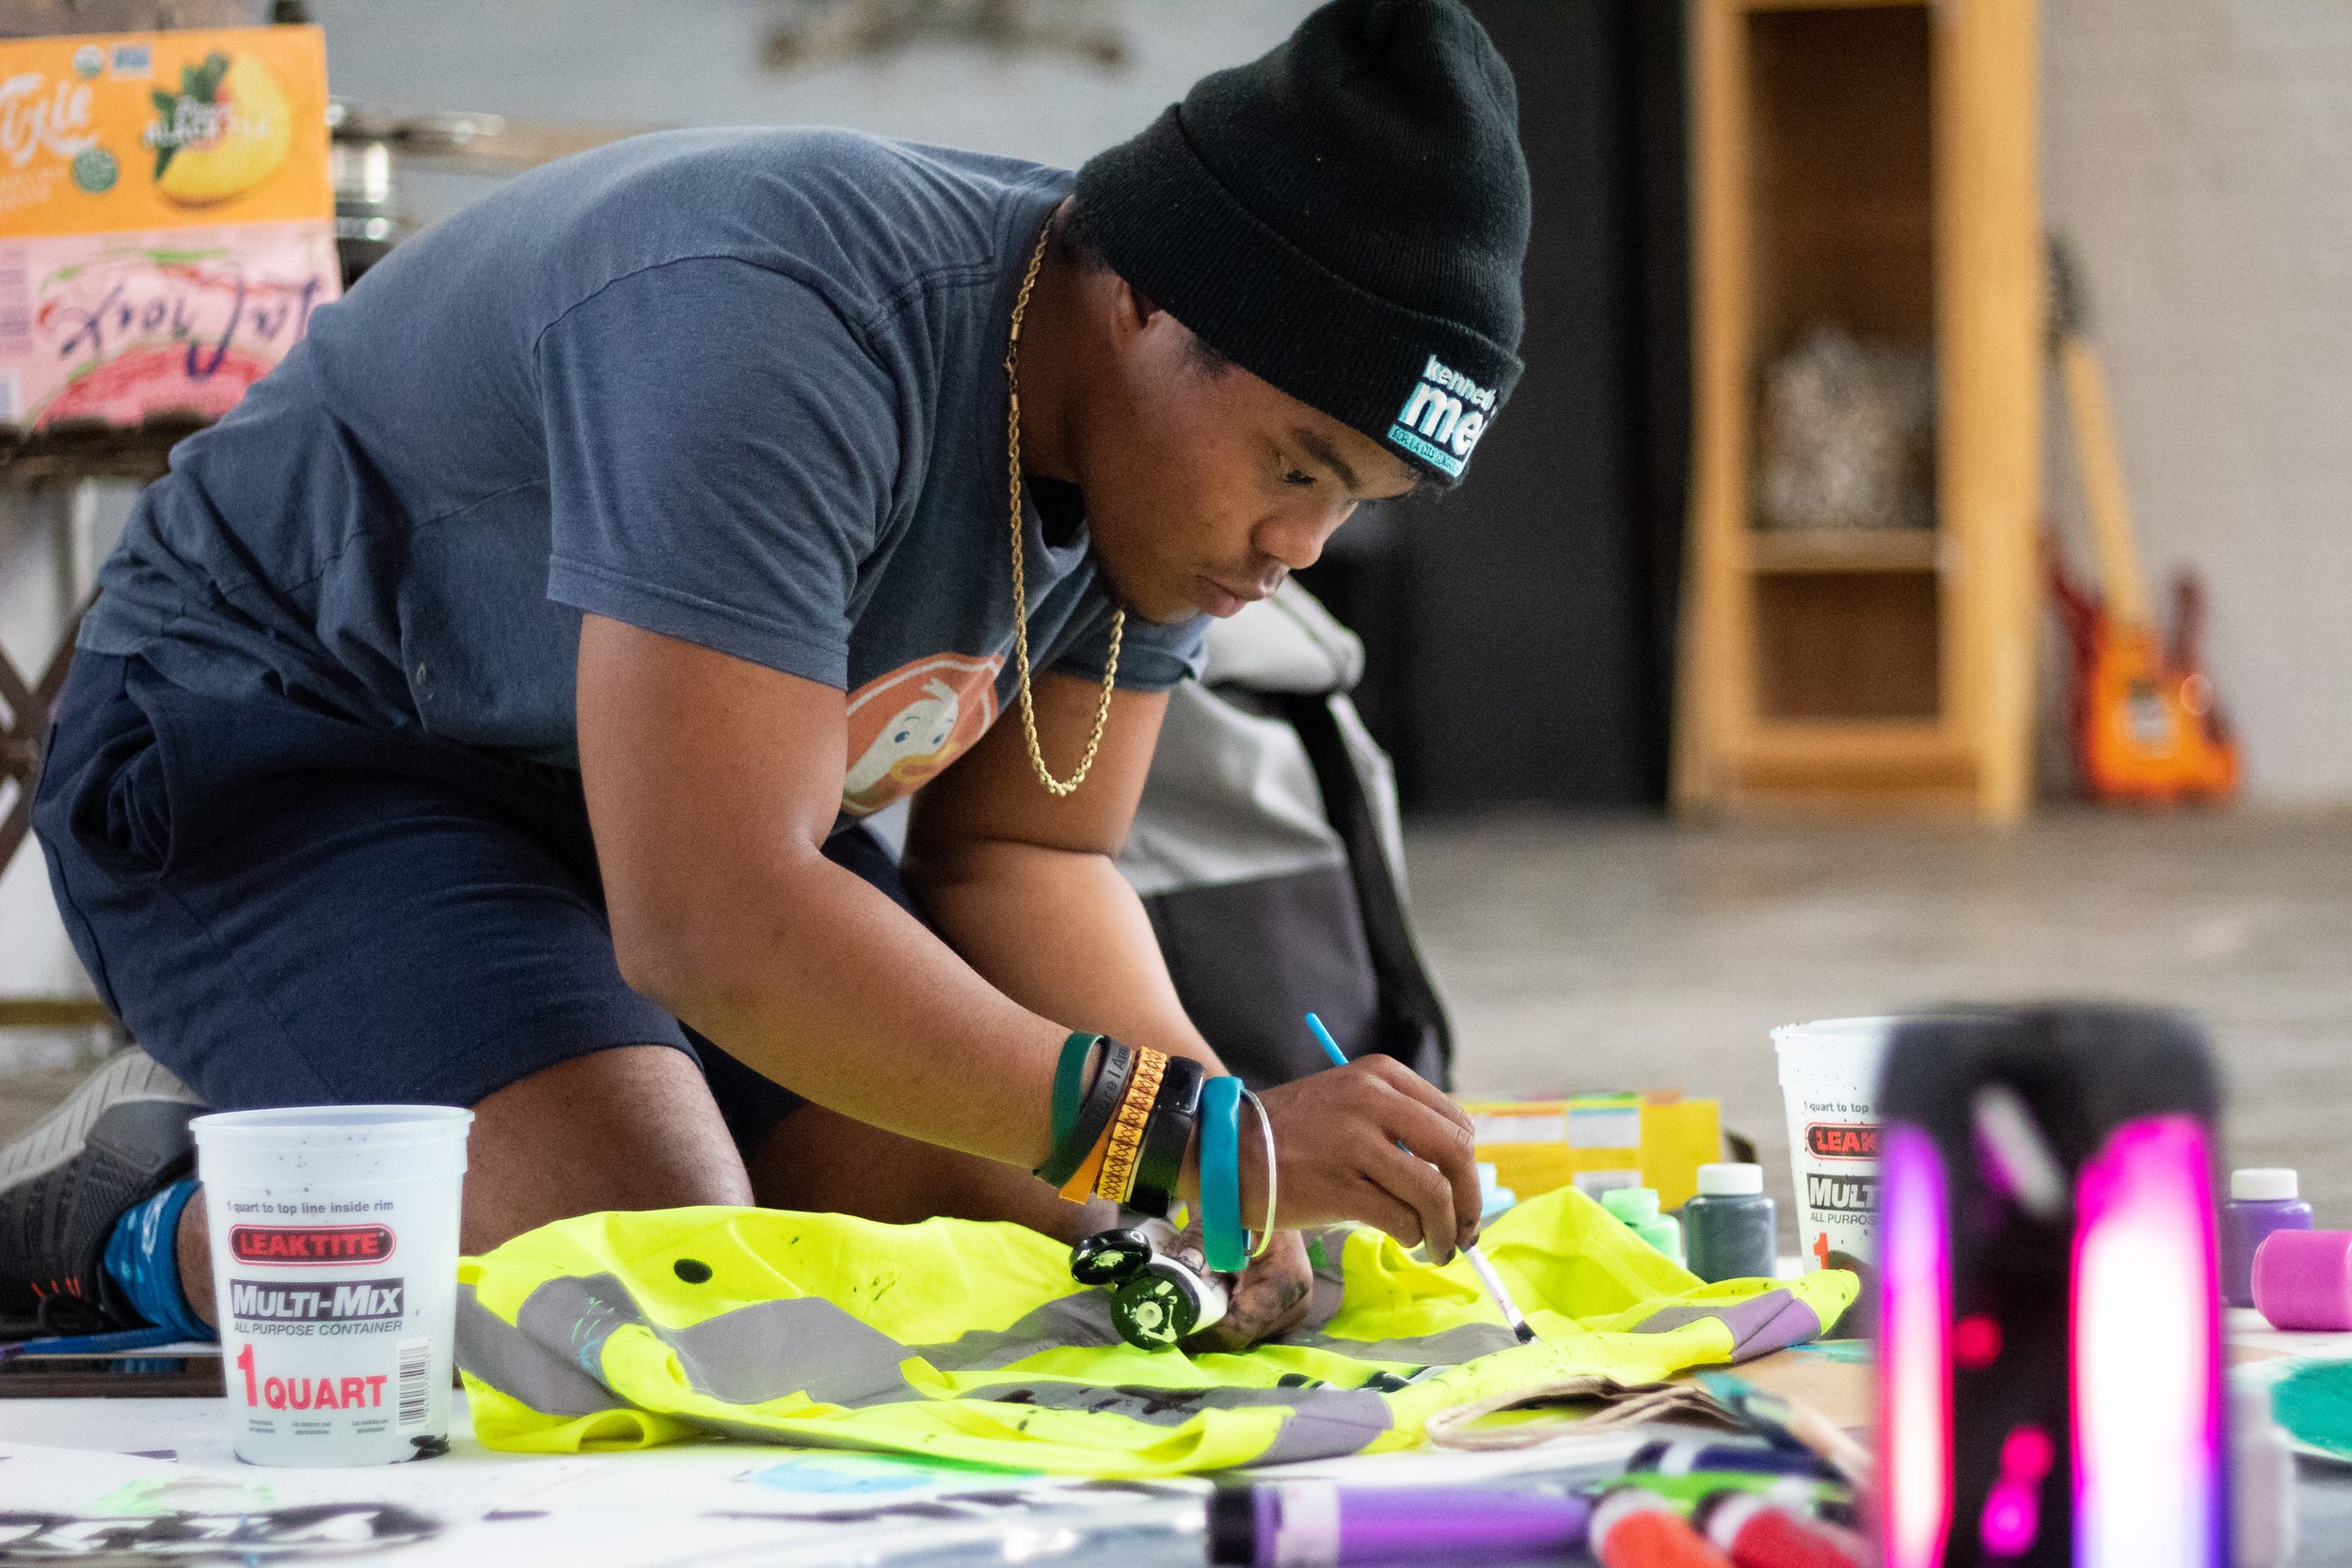  Sim Bilal painting YCSLA (Youth Climate Strike Los Angeles) onto a high visibility jacket, during a sign making event, for the Youth Climate Strike at the Los Angeles City Hall the next day. Sim is the main organizor and director for the Youth Clima